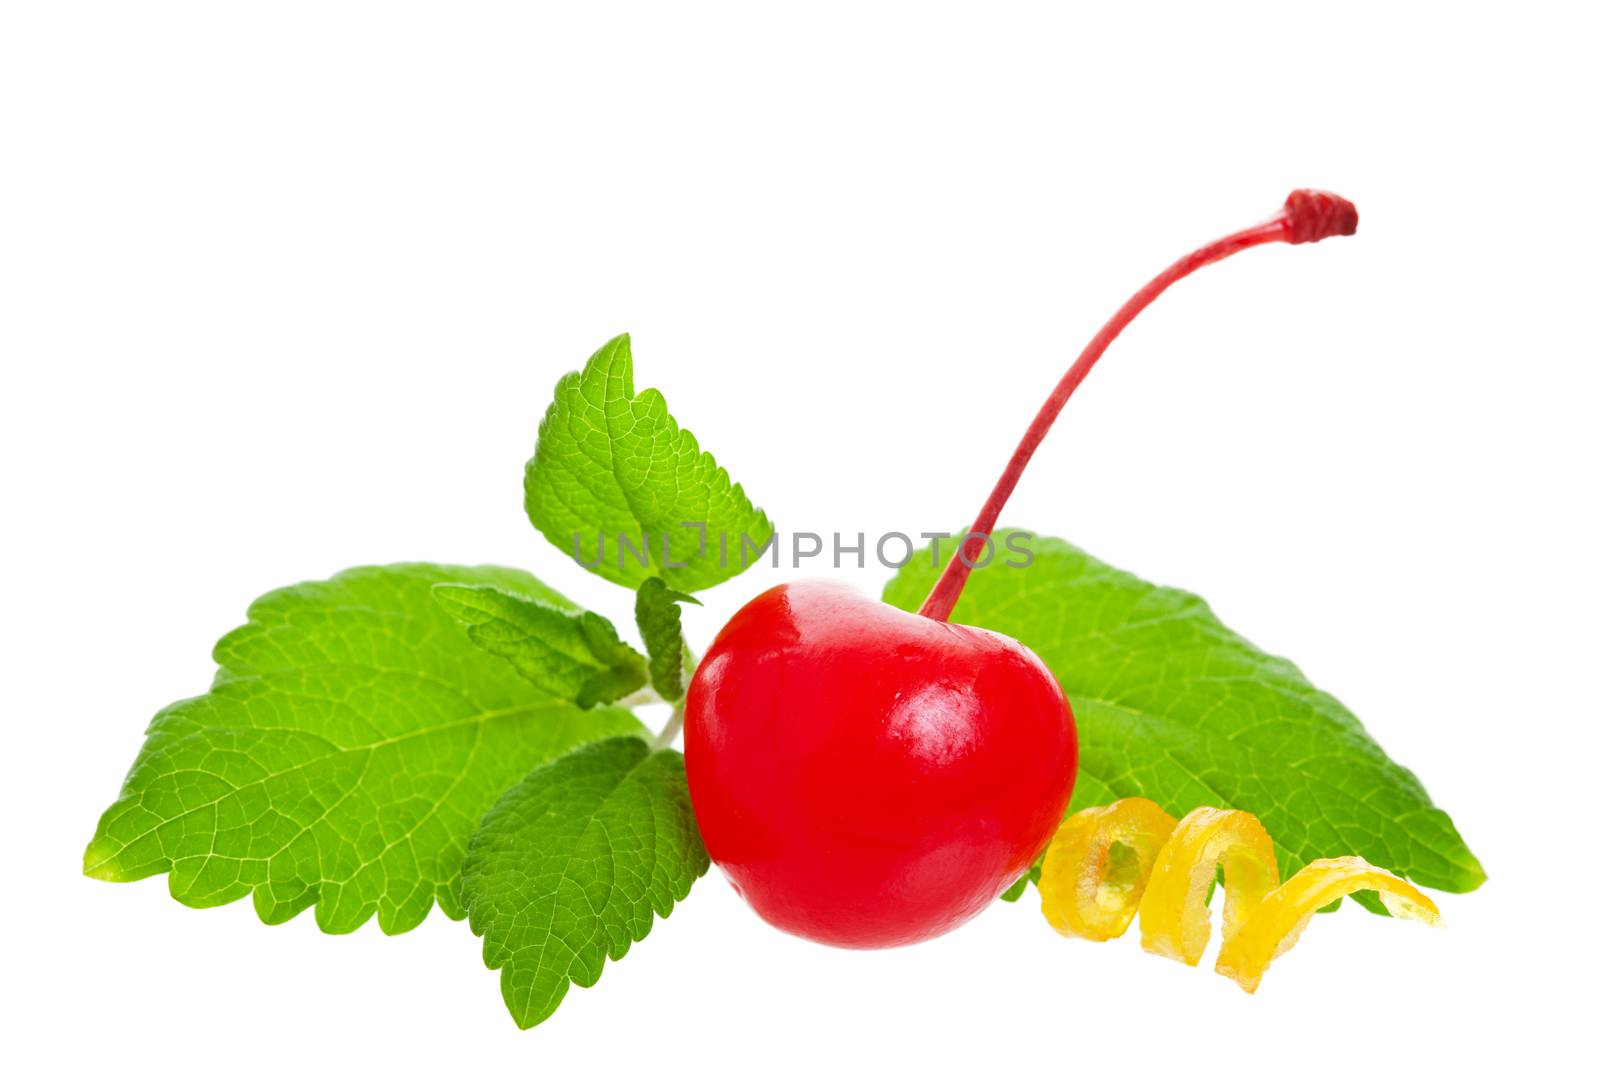 A sprig of Lemon Balm with a cherry and lemon curl garnish.  Shot on white background.